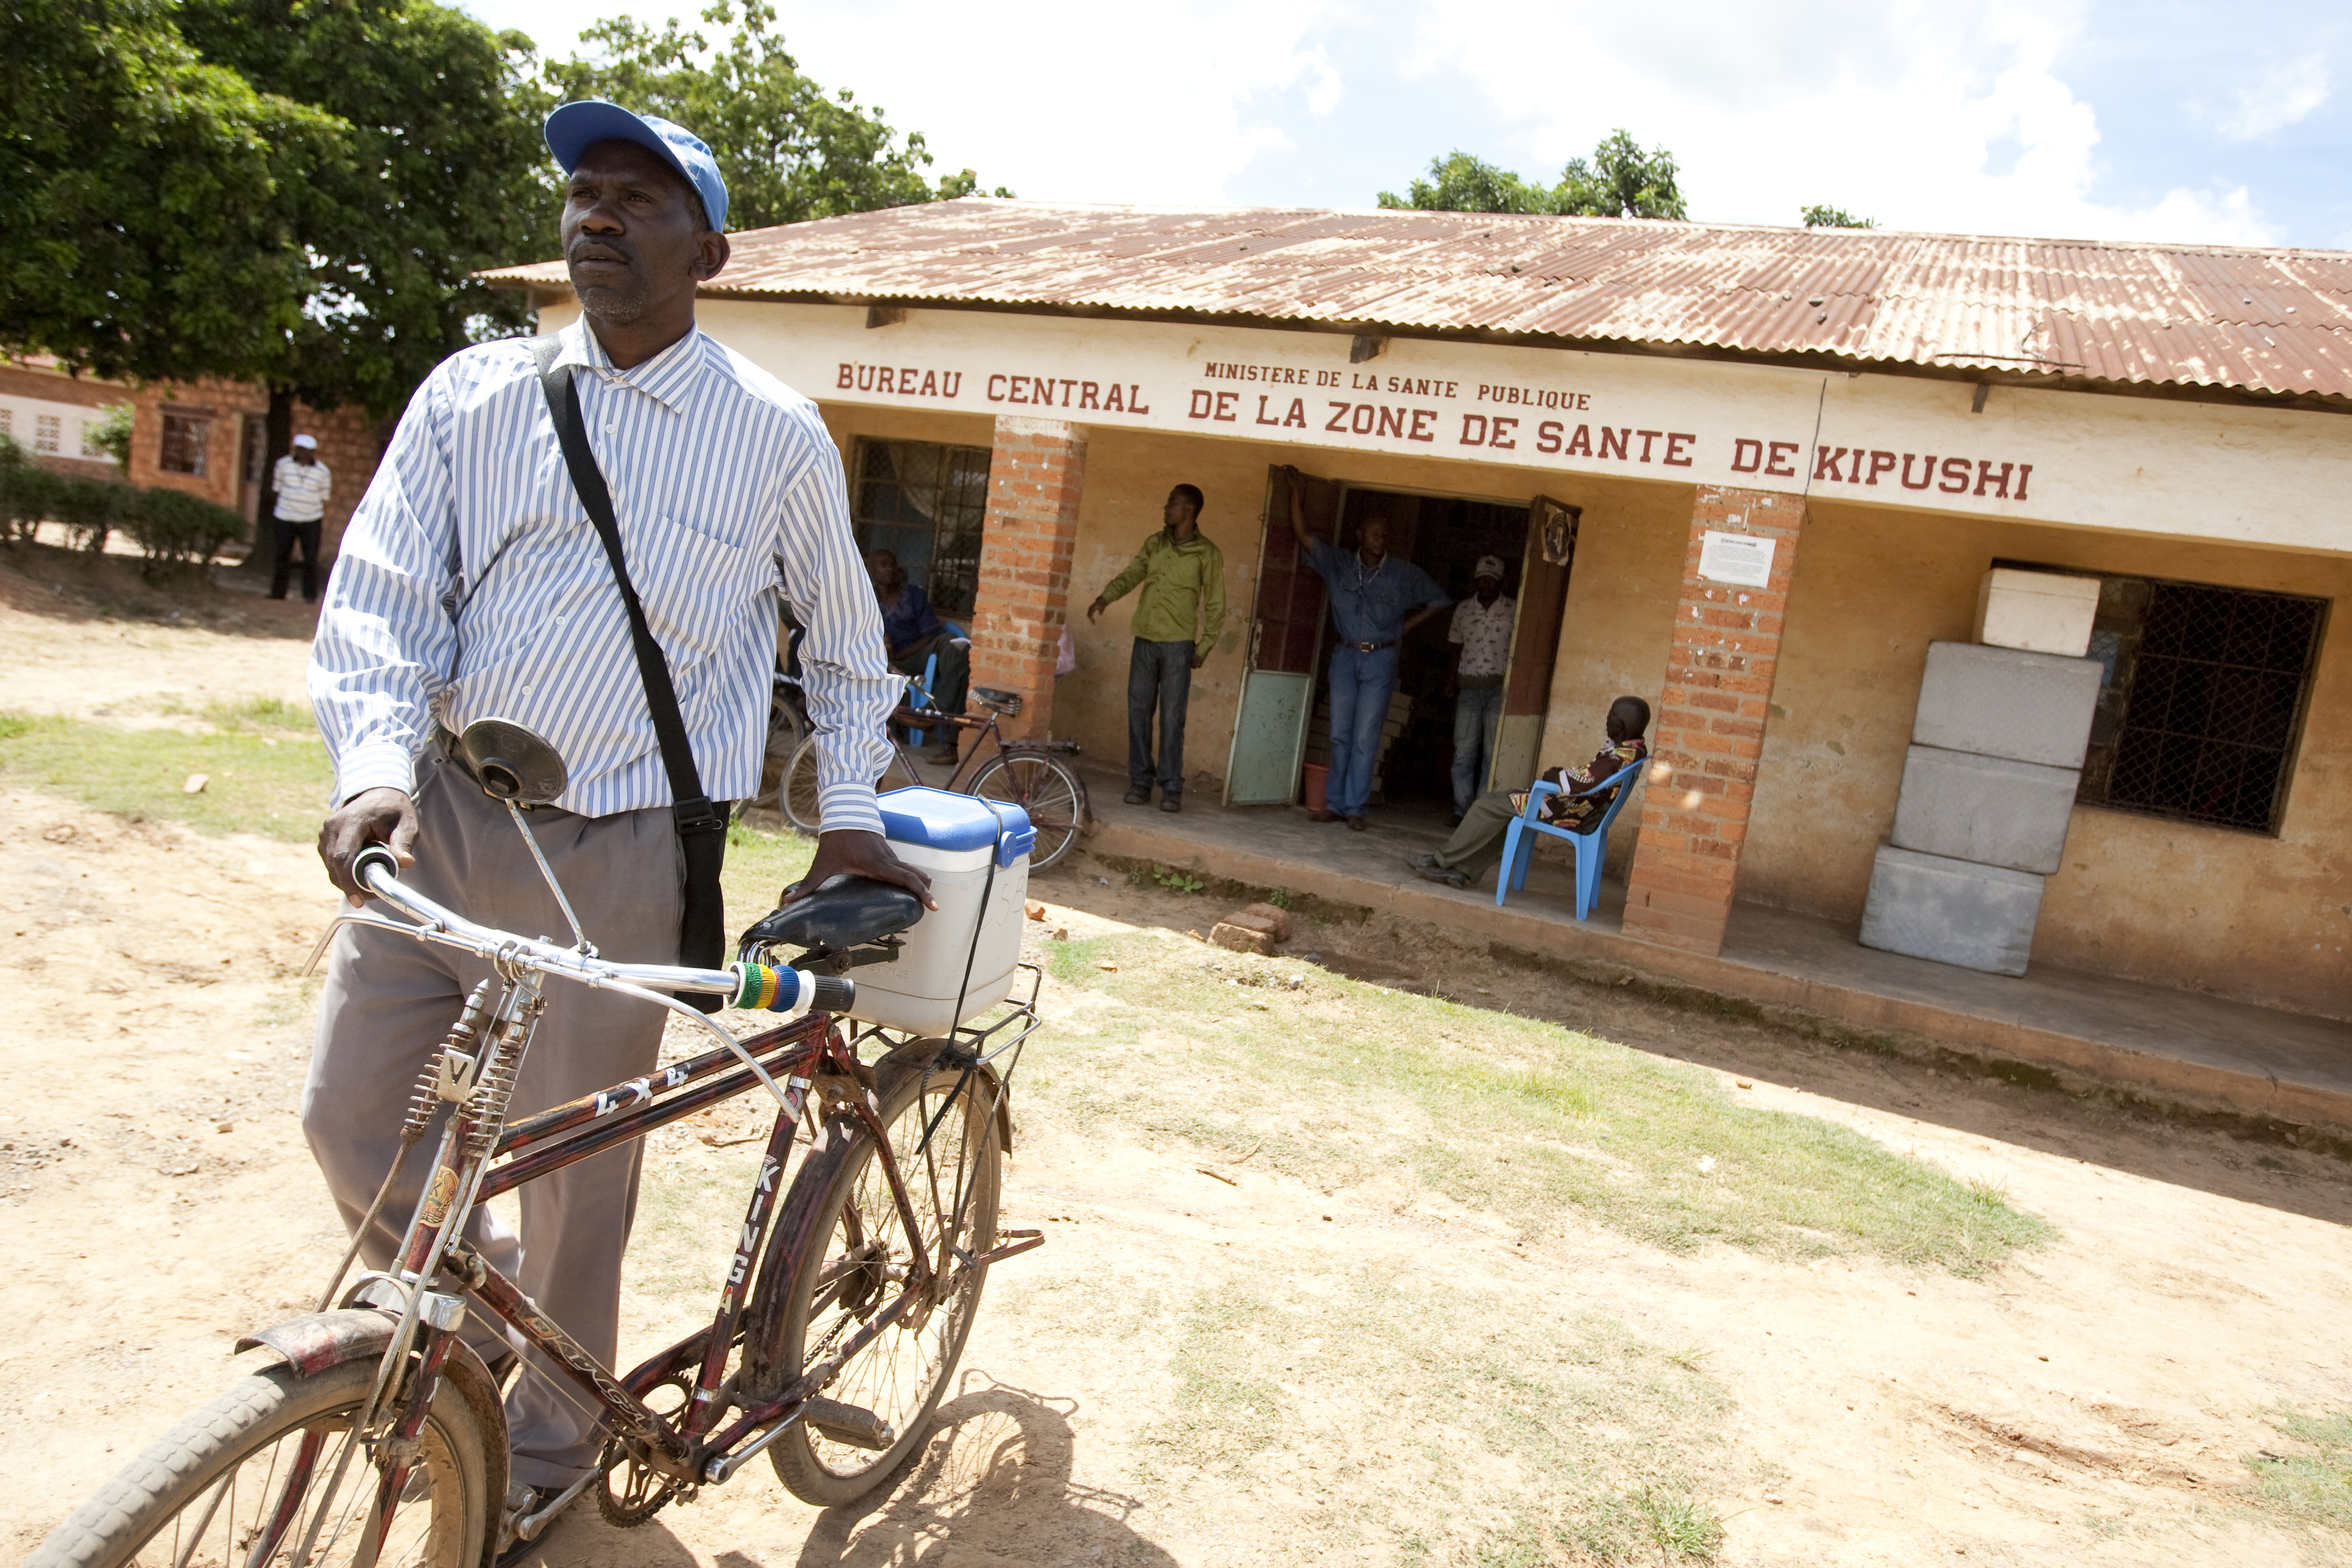 Assistant nurse Guy Bakatumaka pushes a bicycle carrying an icebox full of vaccines in DRC.